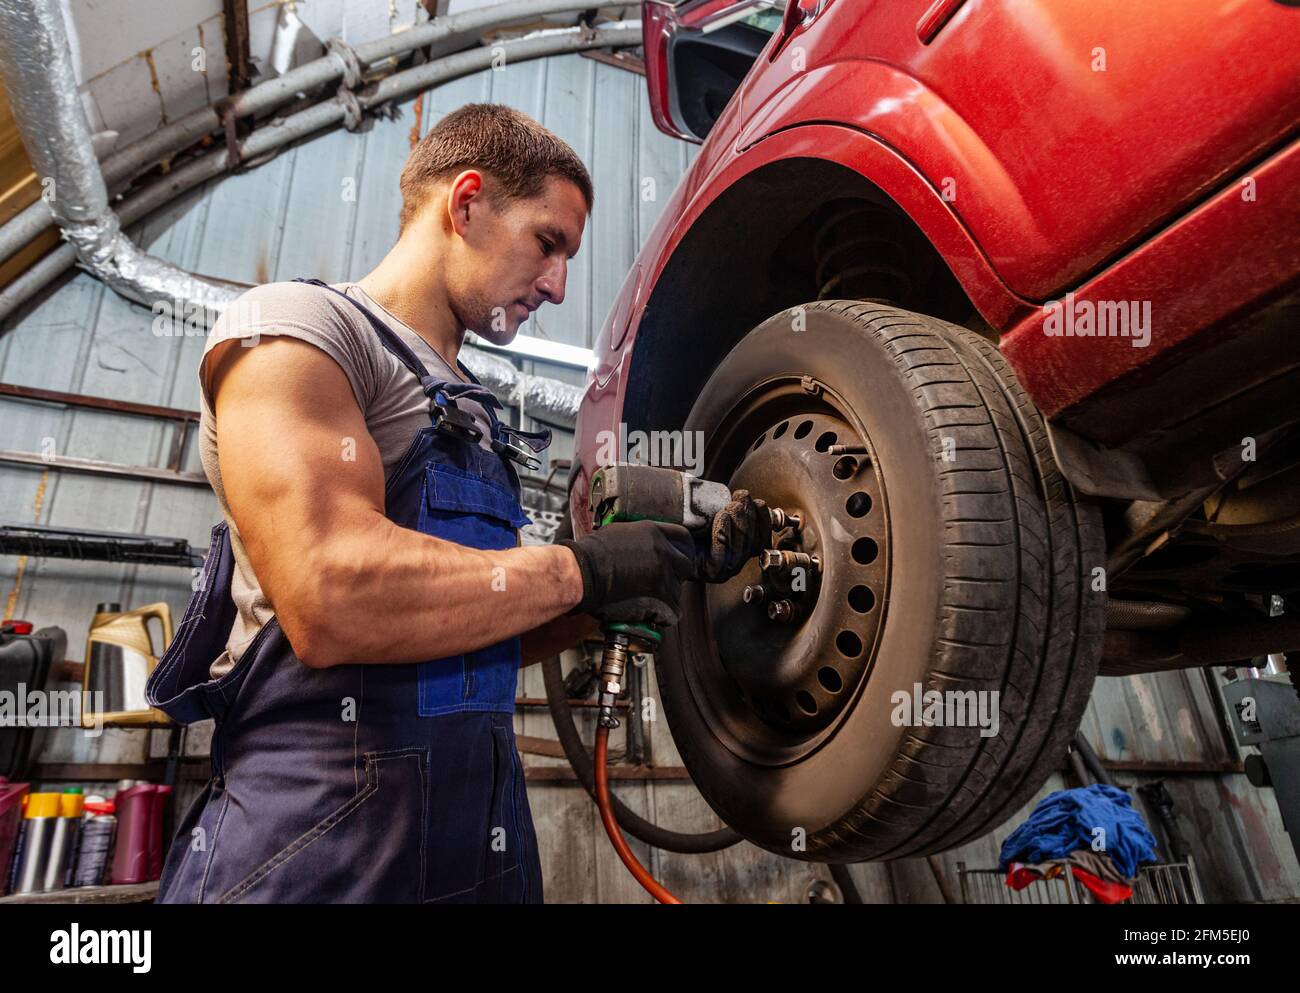 A muscular mechanic is maintaining wheels on a vehicle in auto garage with pneumatic tool. Stock Photo